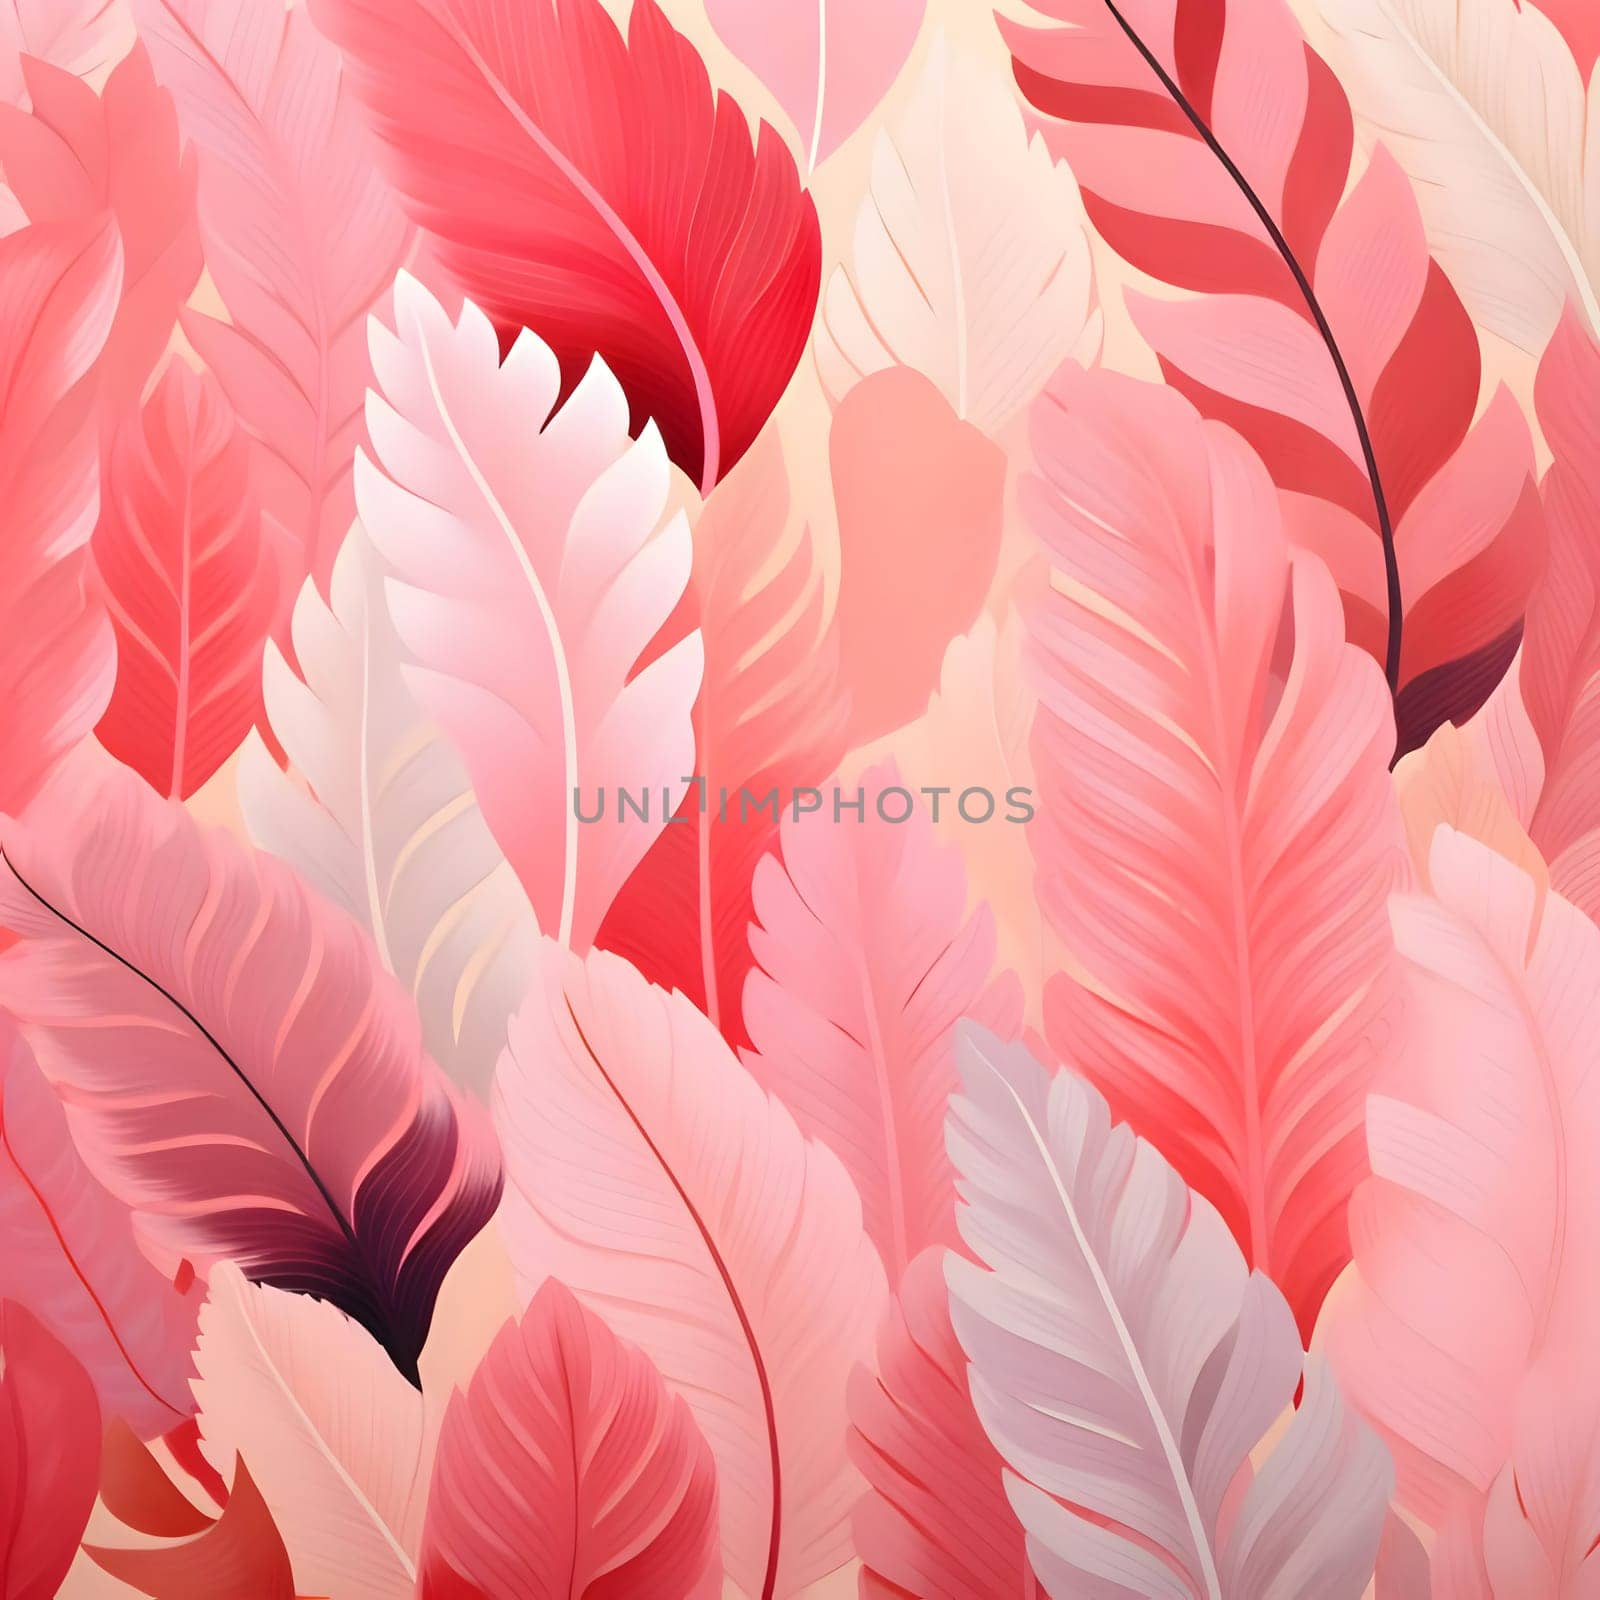 Patterns and banners backgrounds: Seamless pattern with pink and white feathers. Vector illustration.